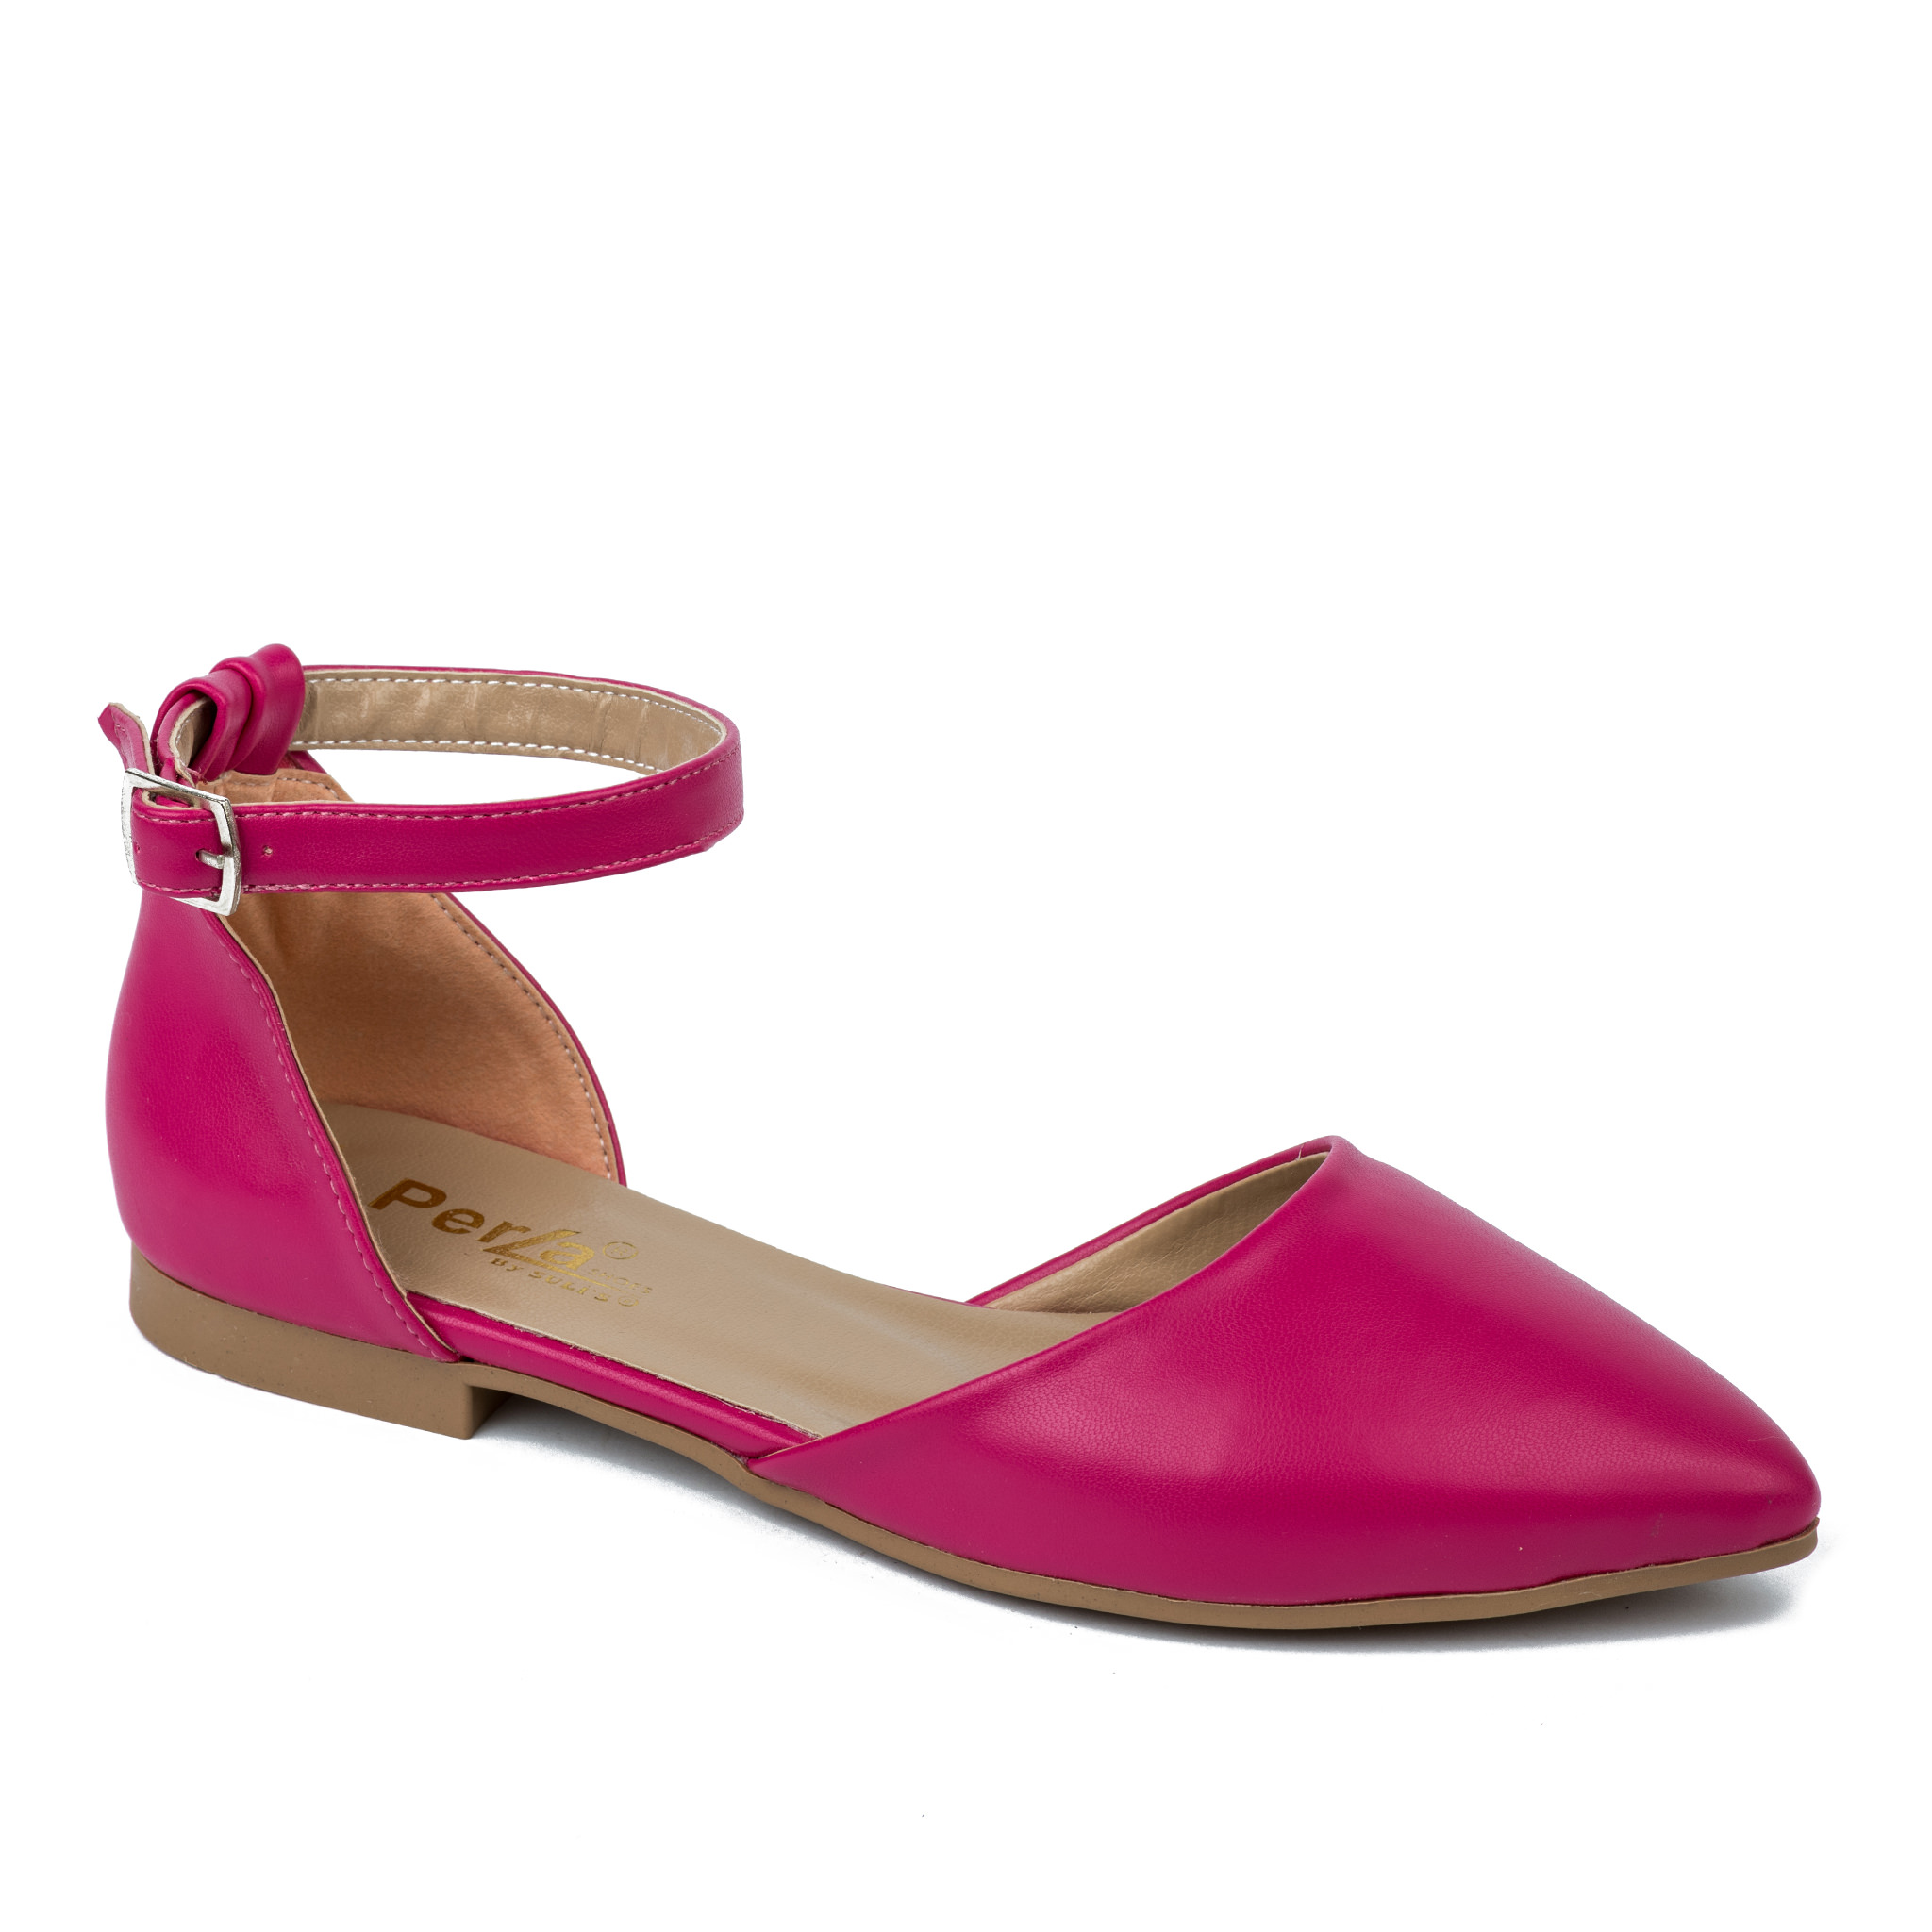 OPEN FLATS WITH BELT - PINK